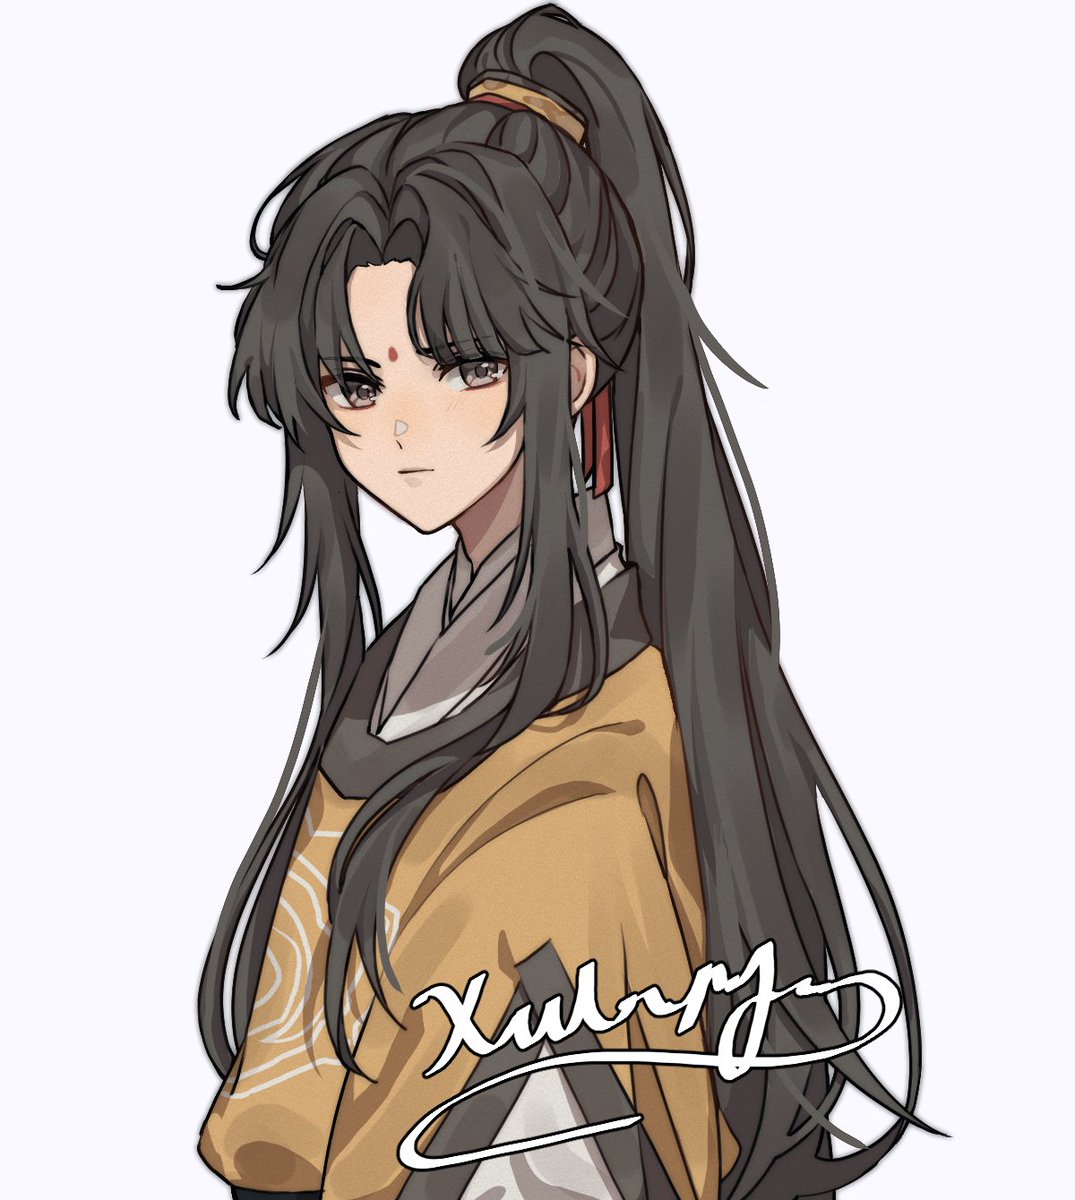 「jin ling 」|XU - in my death era working on commissionsのイラスト